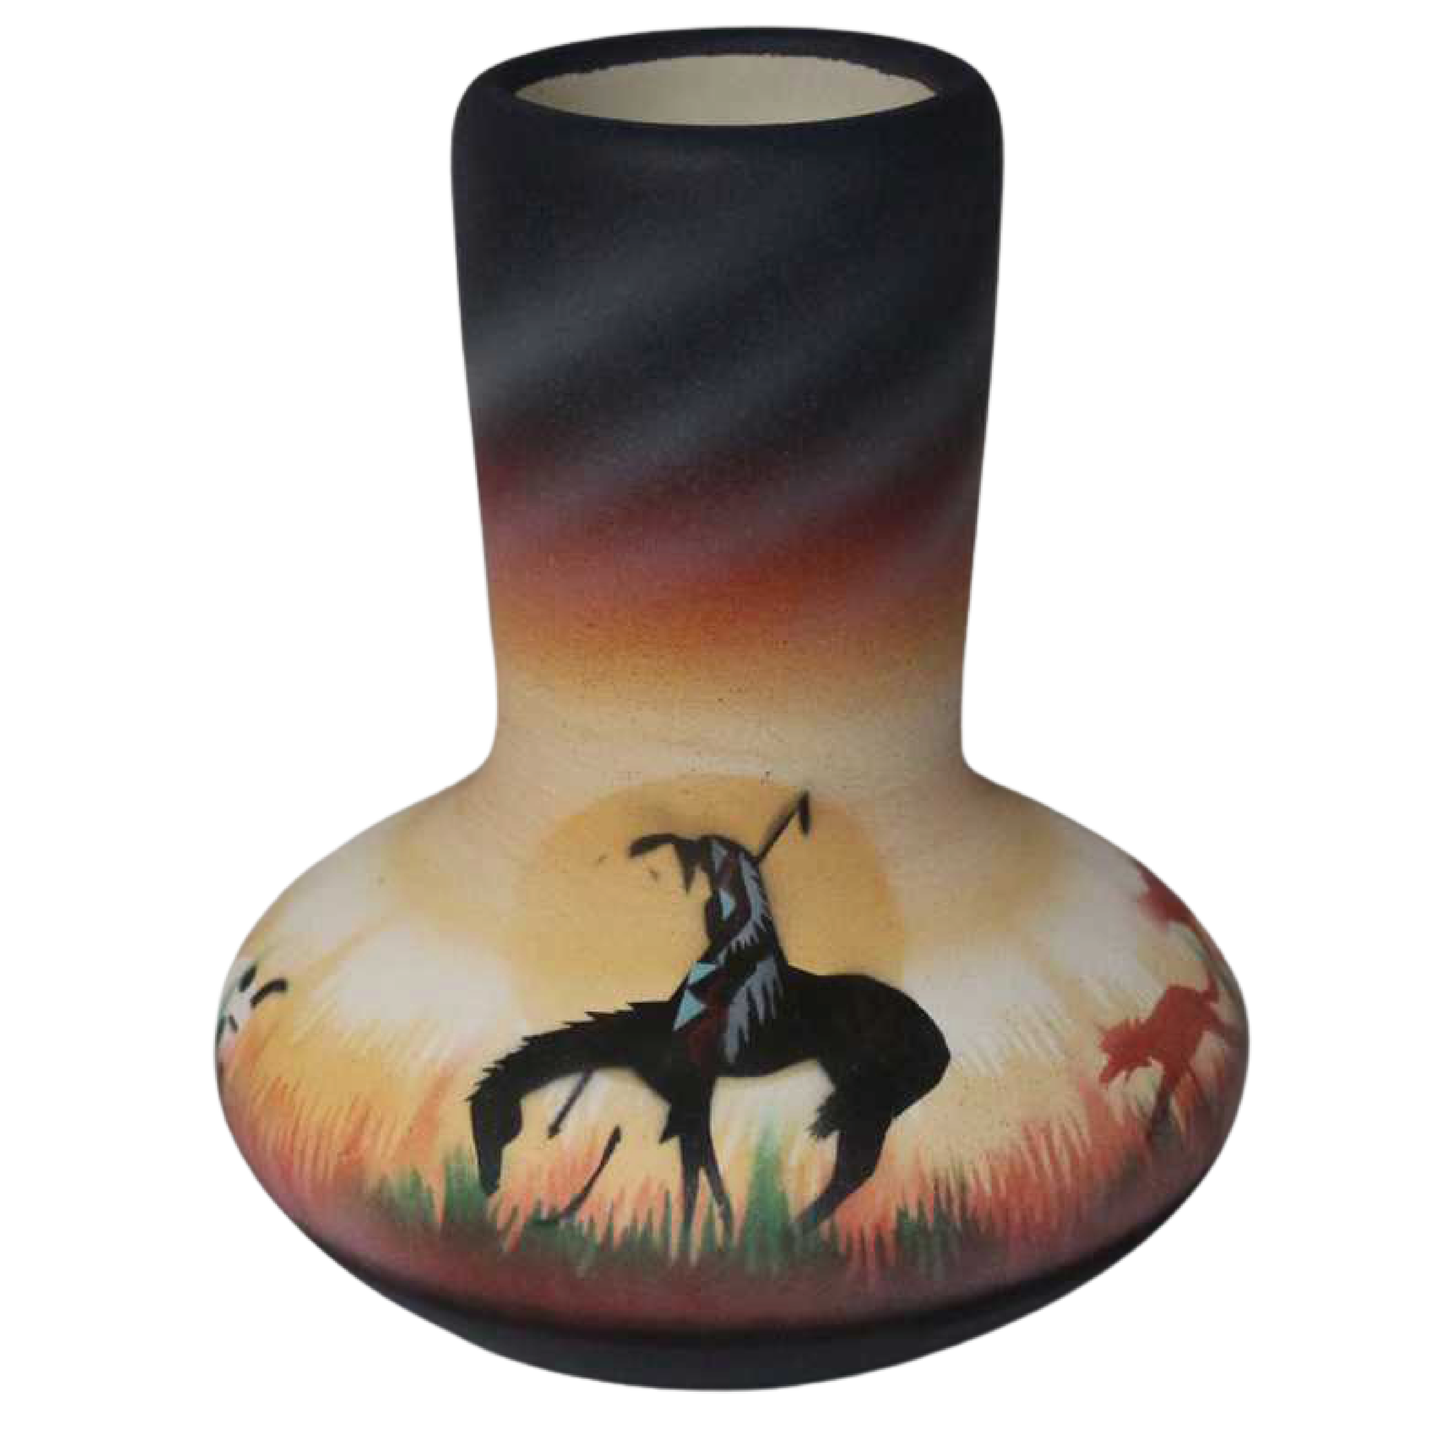 End of the Trail 4 1/2 x 5 Bud Vase - (ETS4)